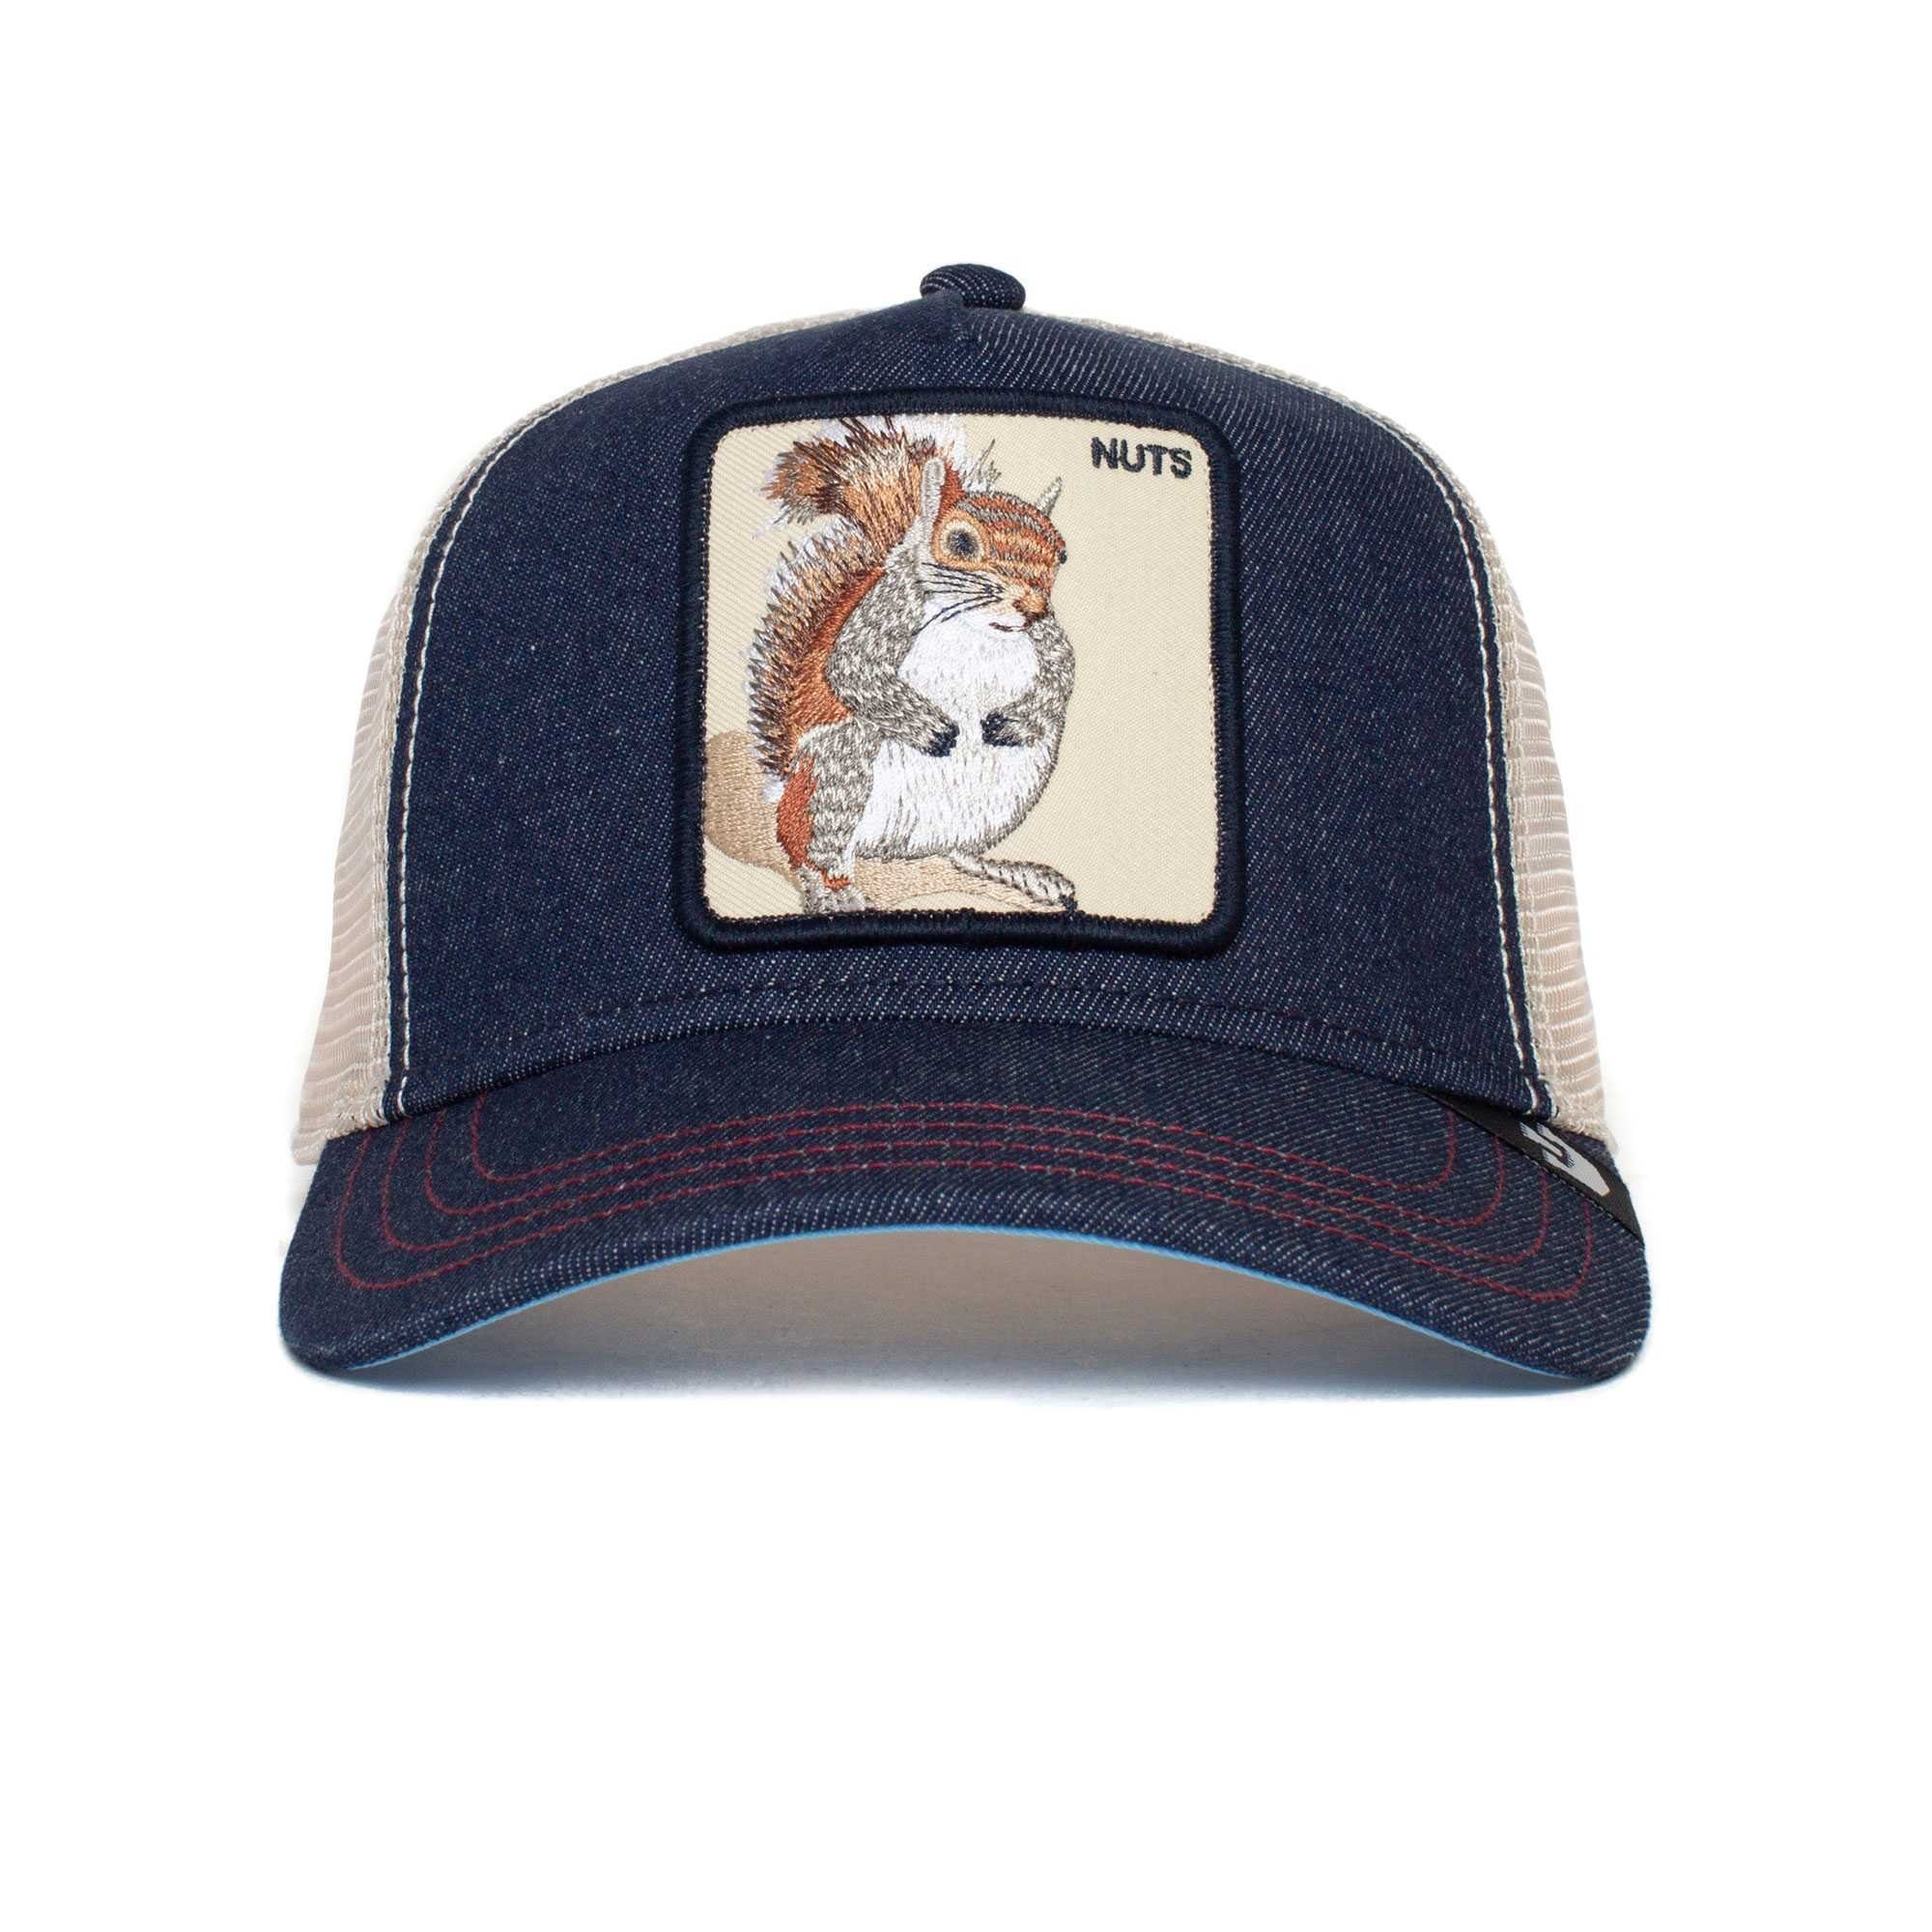 Trucker Frontpatch, Cap Nuts Squirrel - Size Bros. GOORIN Cap Baseball Kappe, One The Unisex